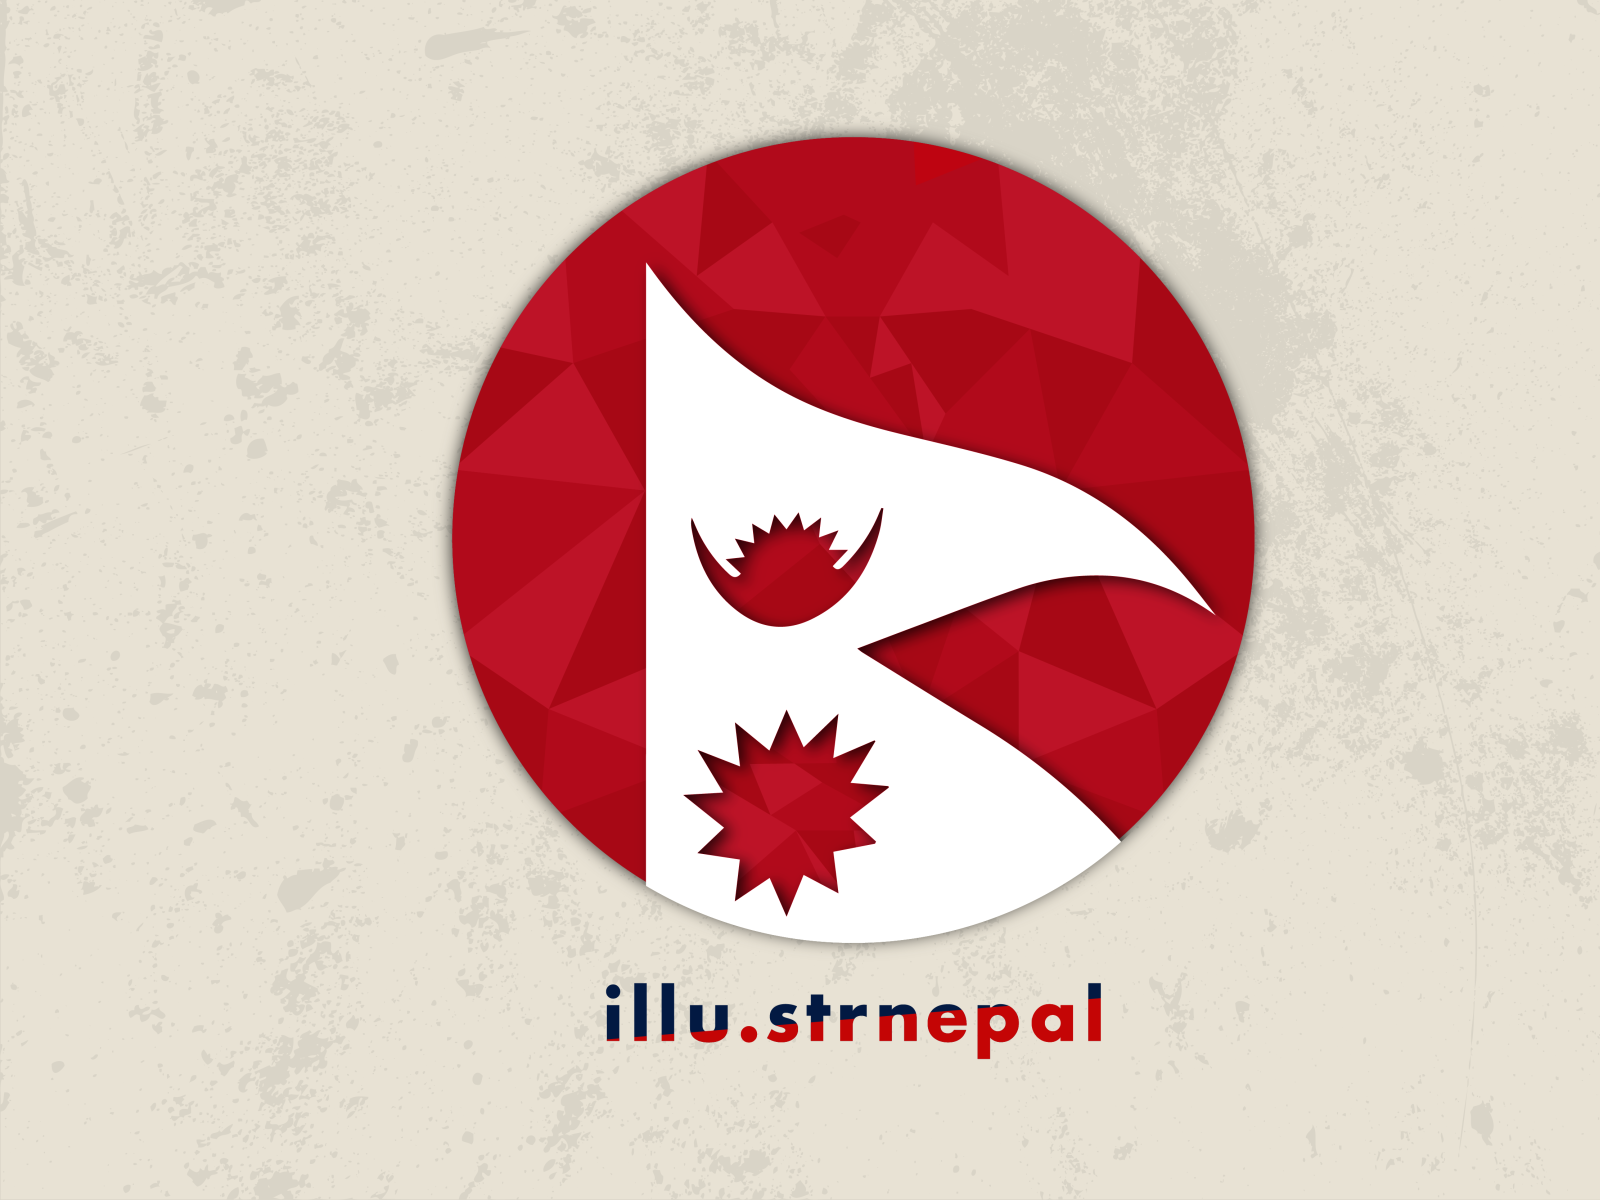 Nepal Travels Logo concept by Jesson Honig on Dribbble